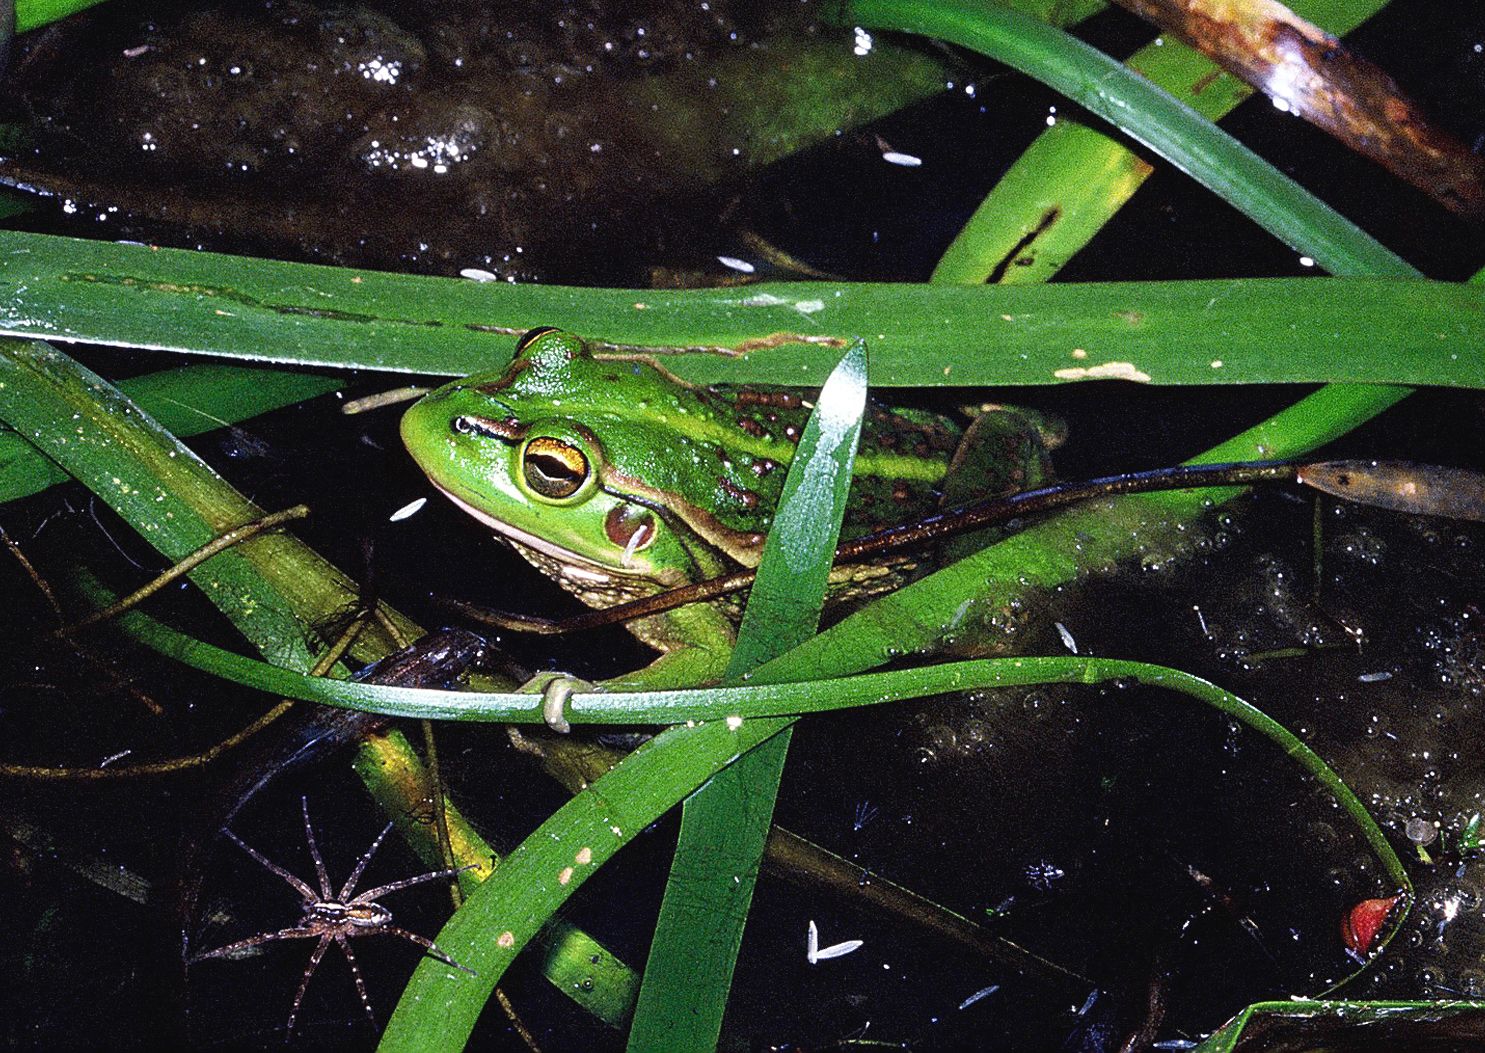 A close up of  bright green frog with yellow markings sitting in water holding on to a long, slim green leaf